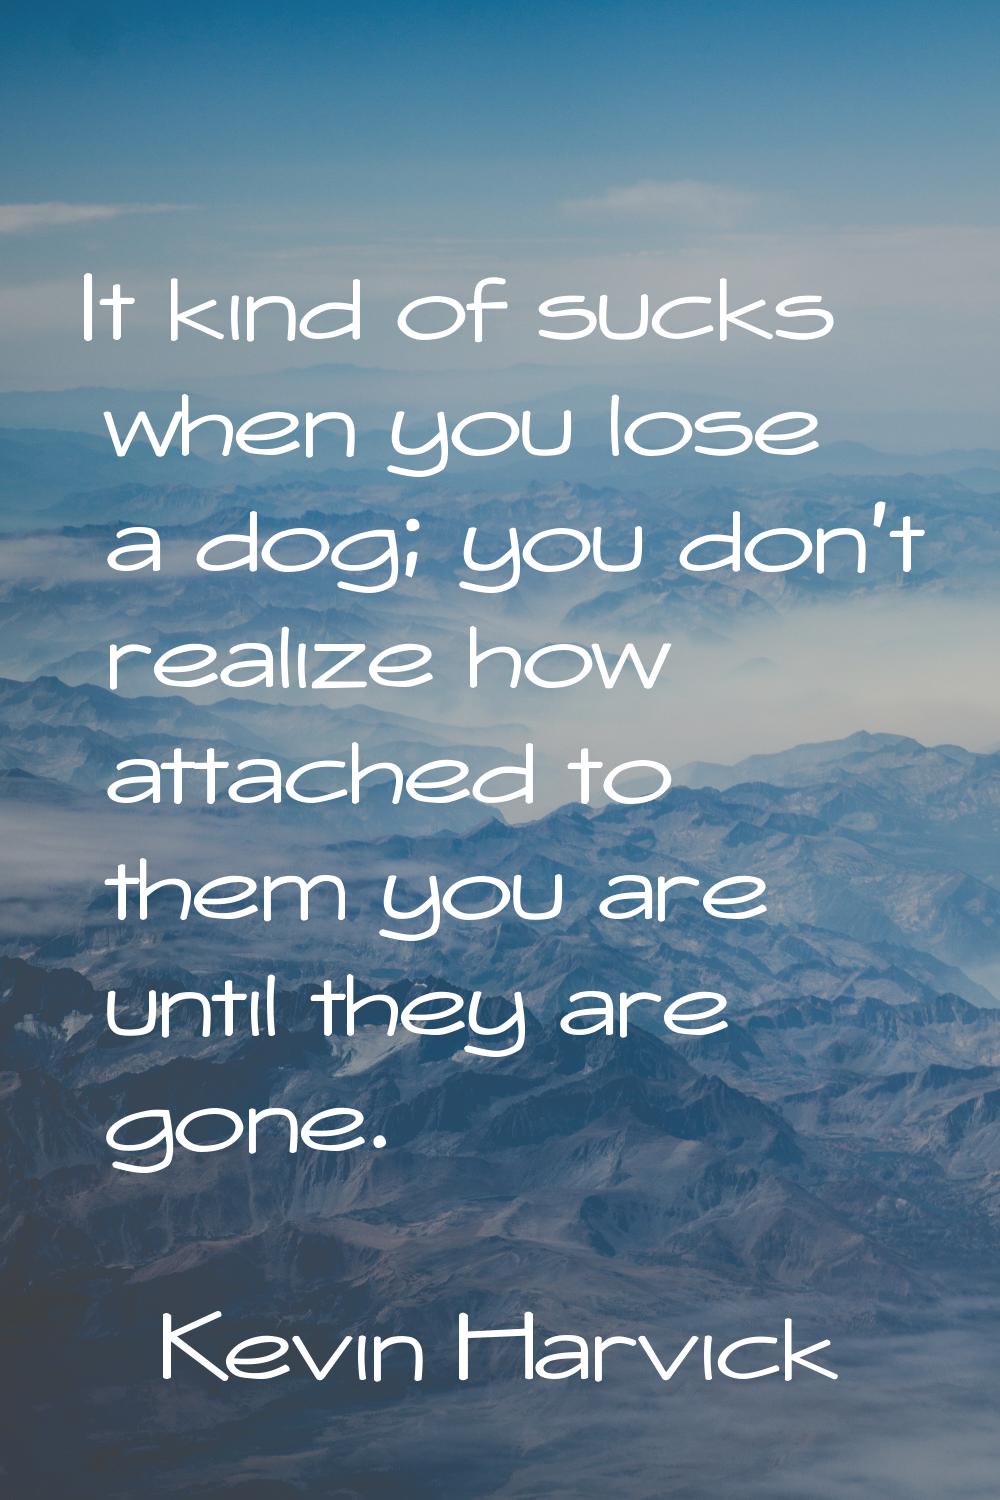 It kind of sucks when you lose a dog; you don't realize how attached to them you are until they are